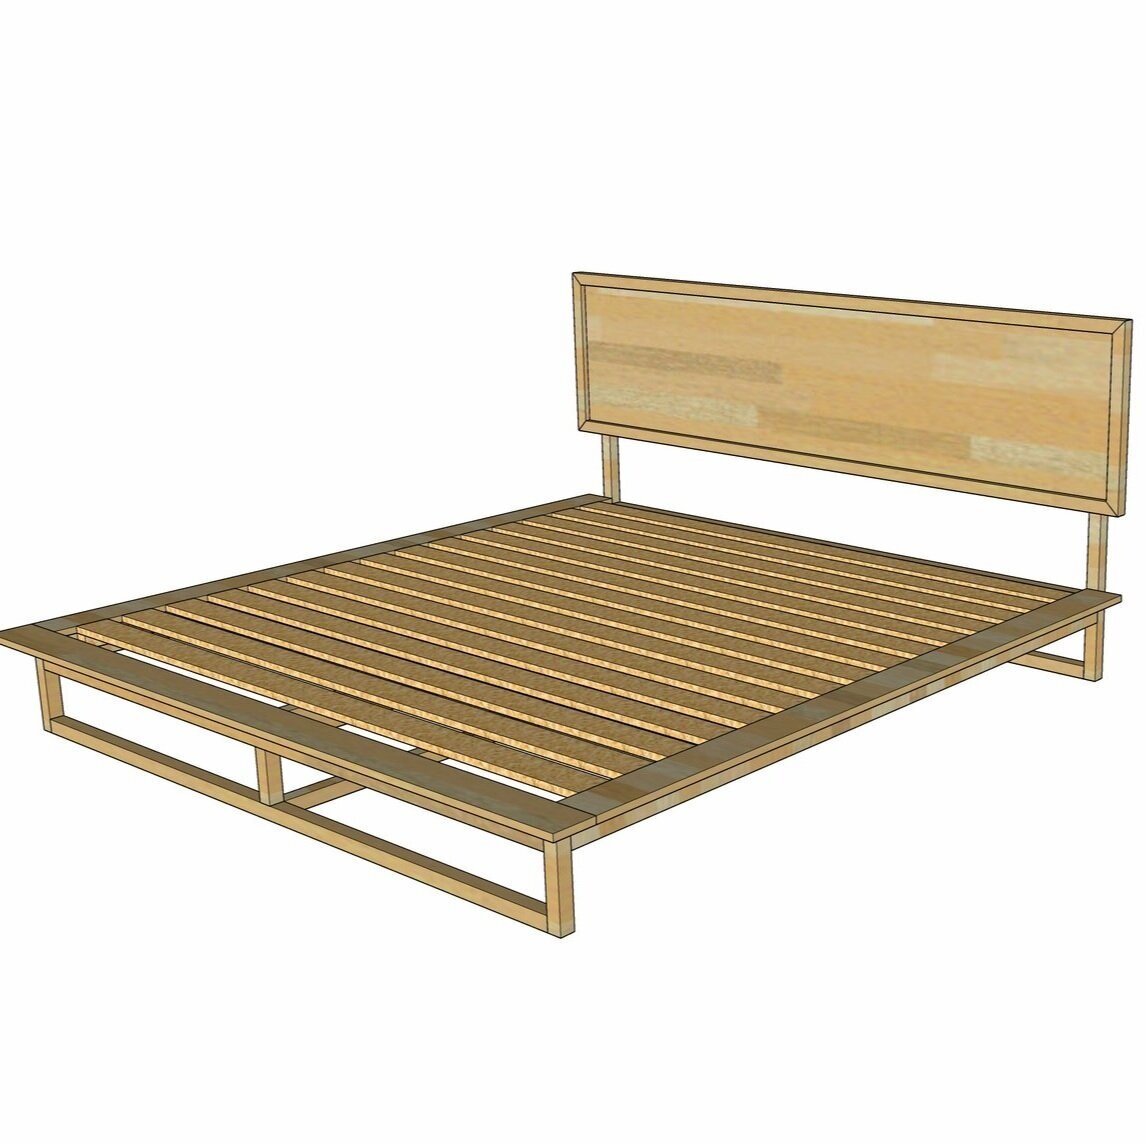 Diy Mid Century Modern King Bed The, Mid Century Modern King Bed